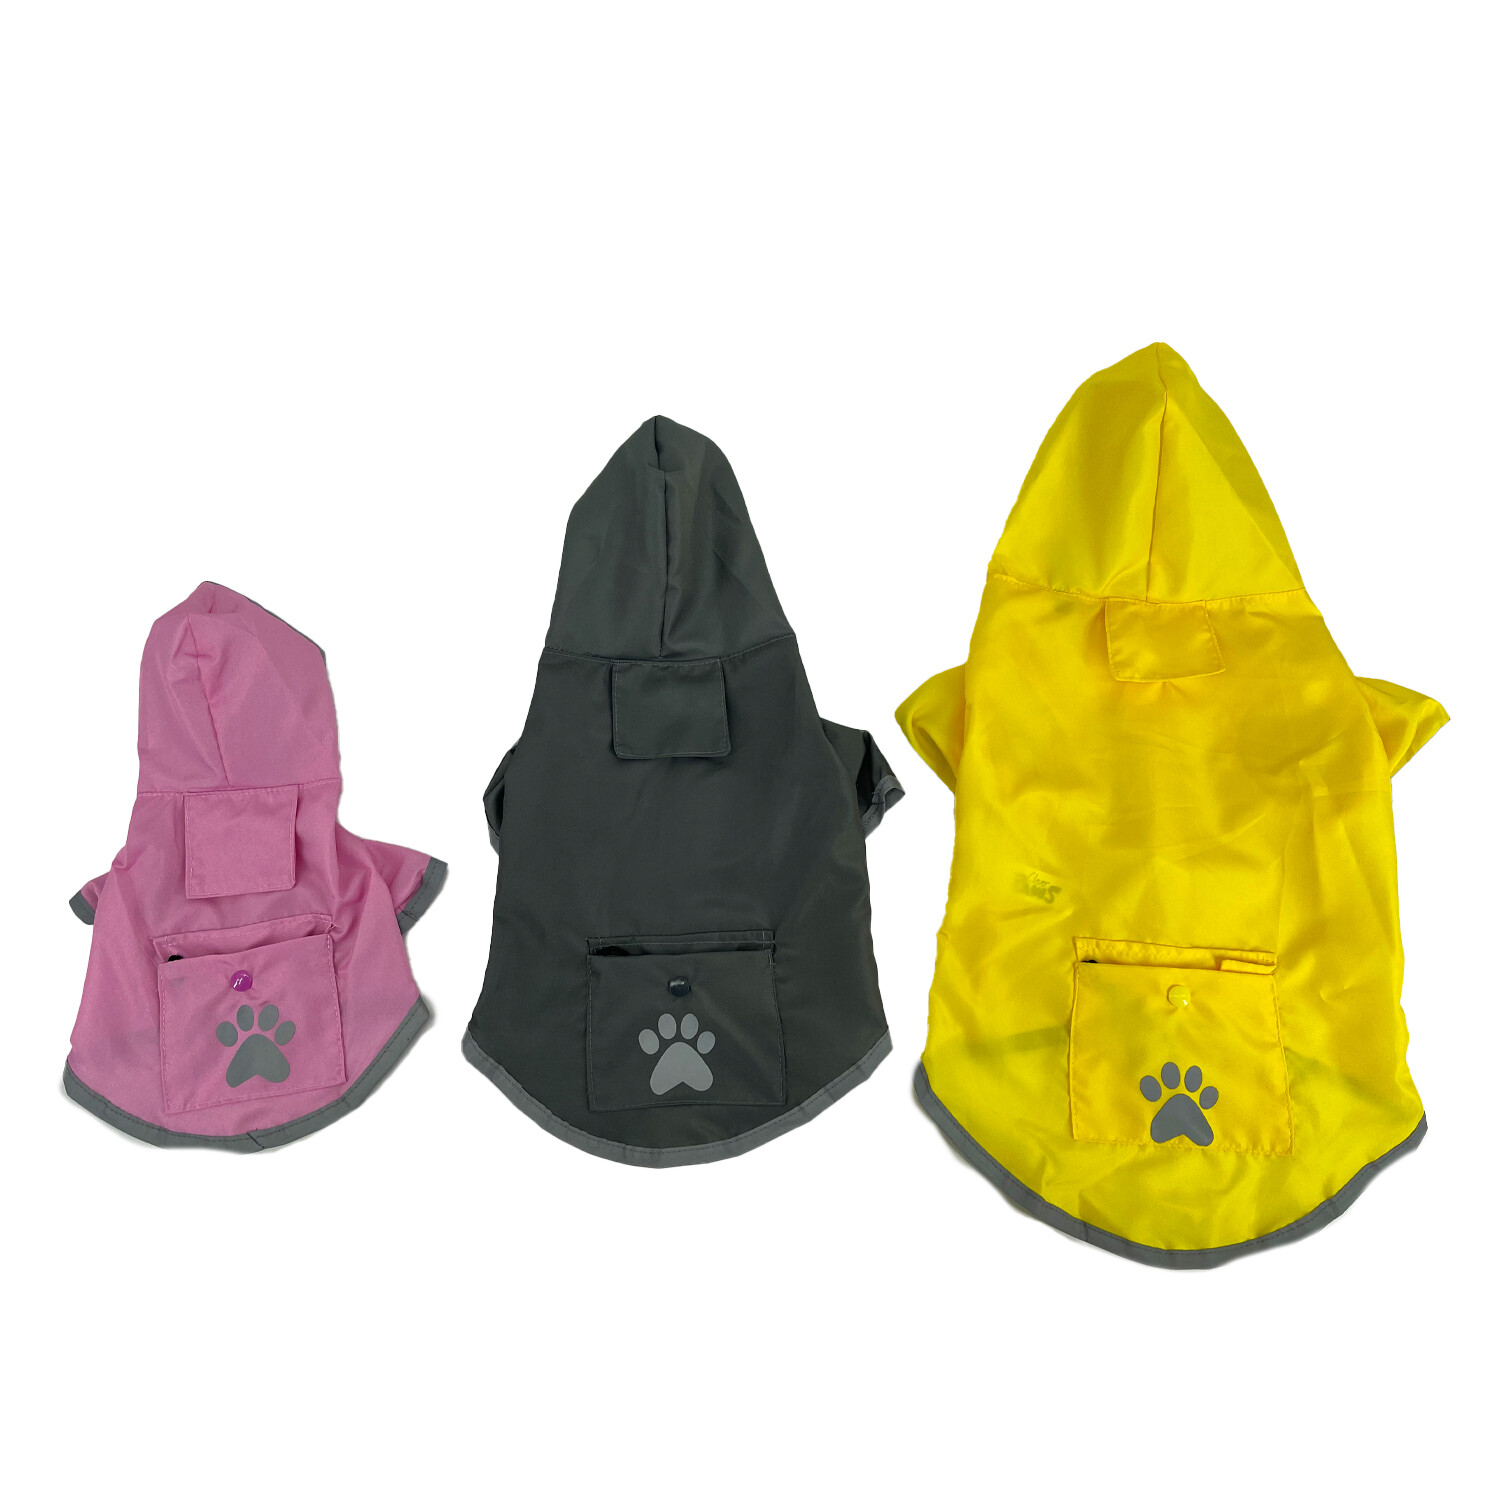 Single Clever Paws Pet Packaway Raincoat 20cm in Assorted styles Image